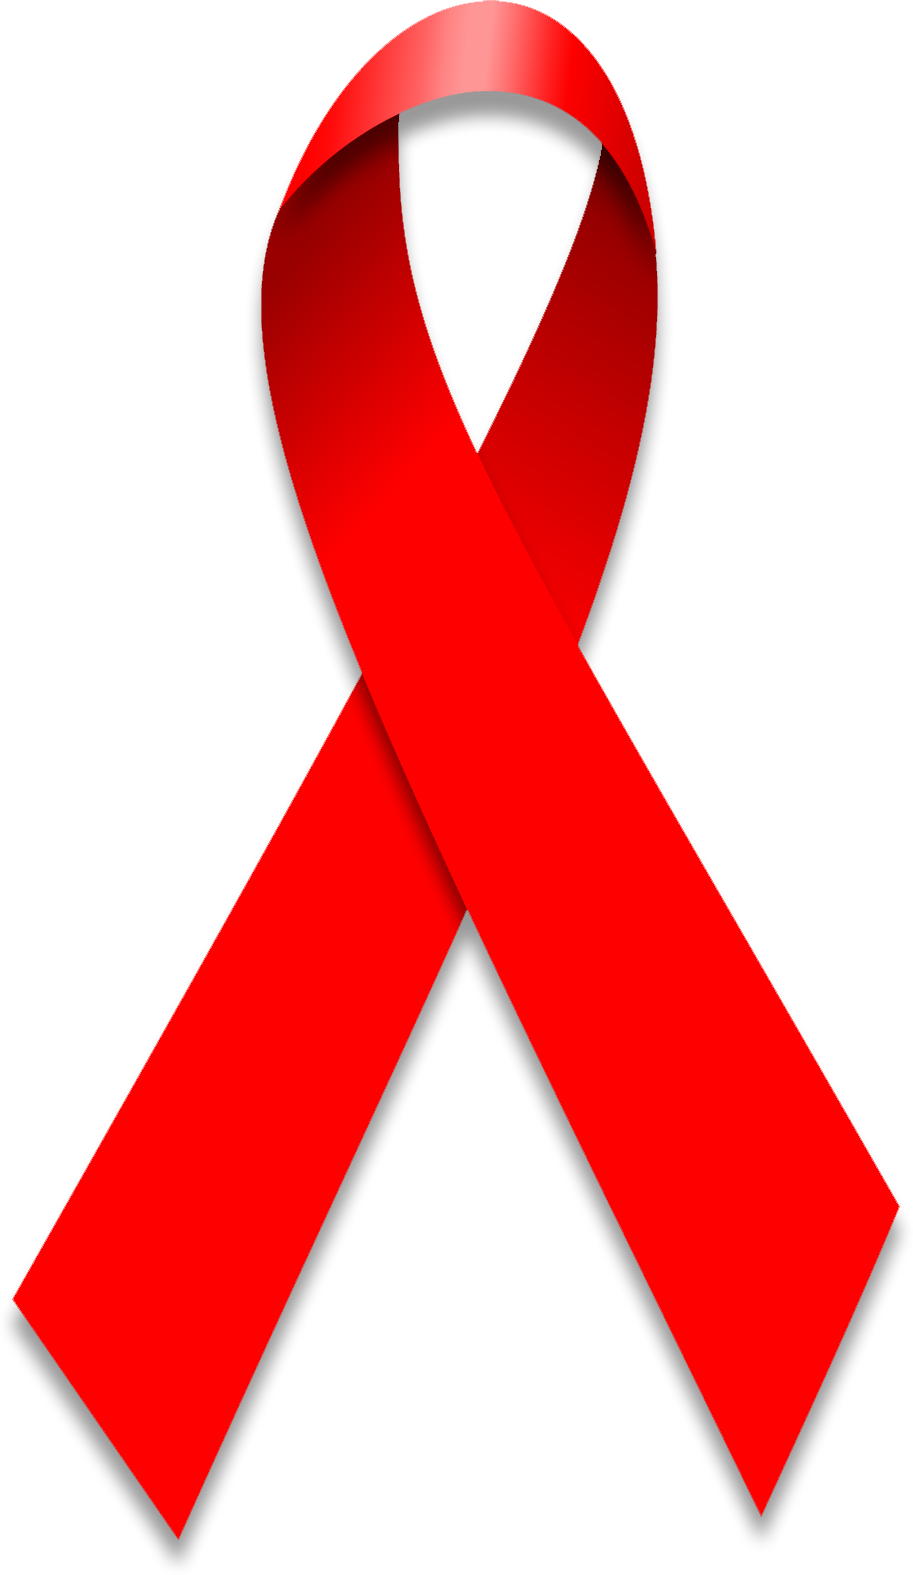 Hiv Aids PNG - 50009